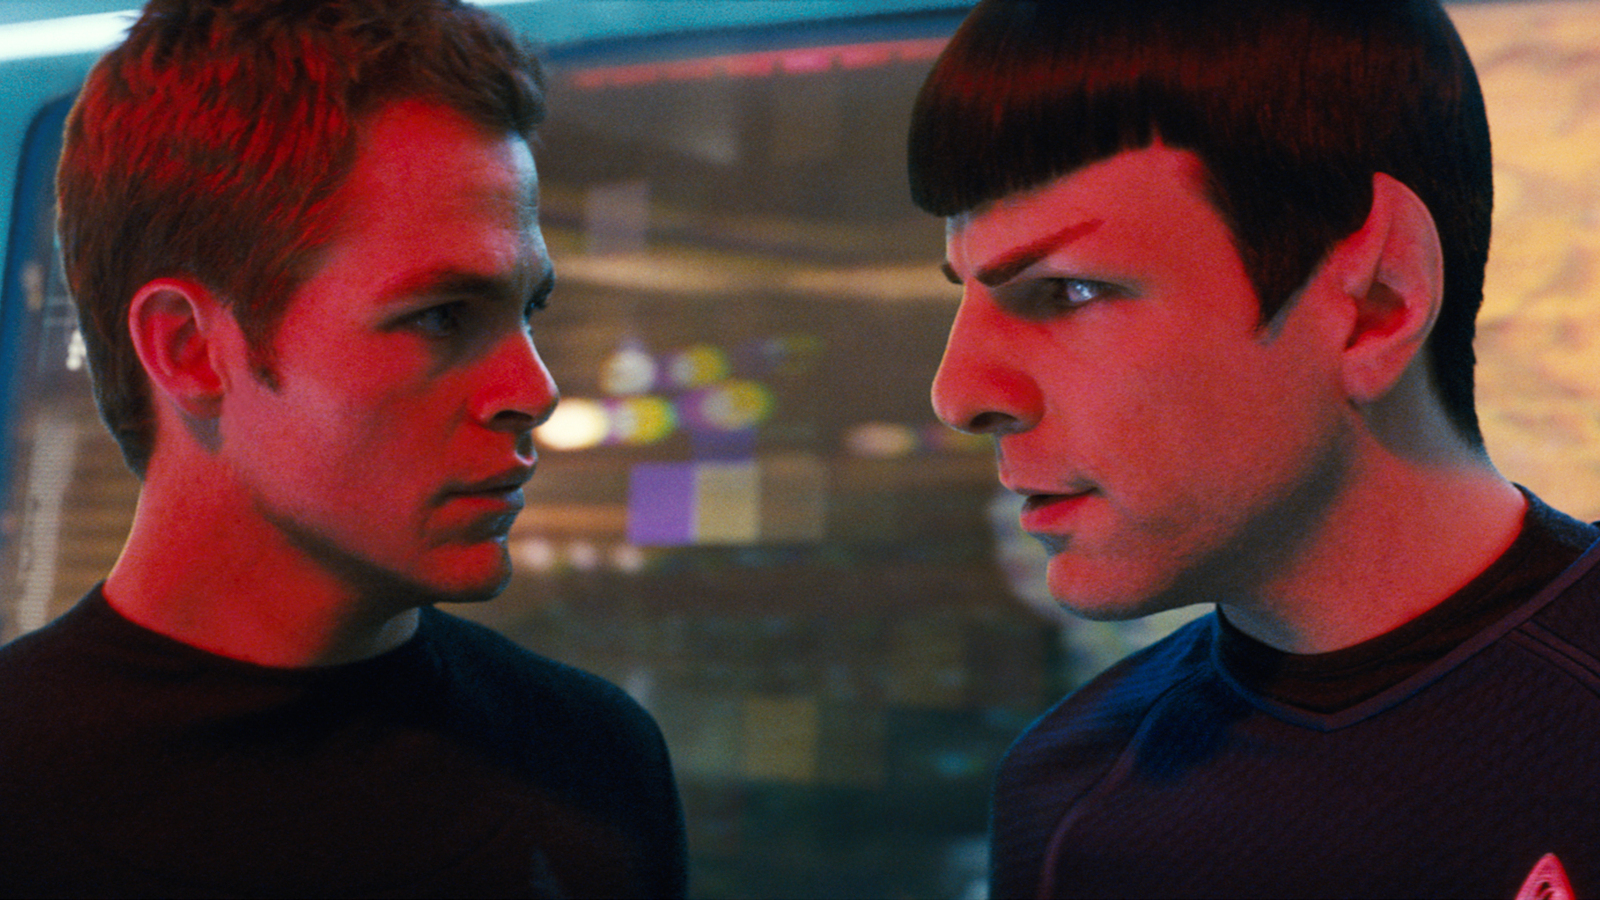 Star Trek - The Future Begins Tonight in Heaven: Cast and Plot Directed by JJ Abrams